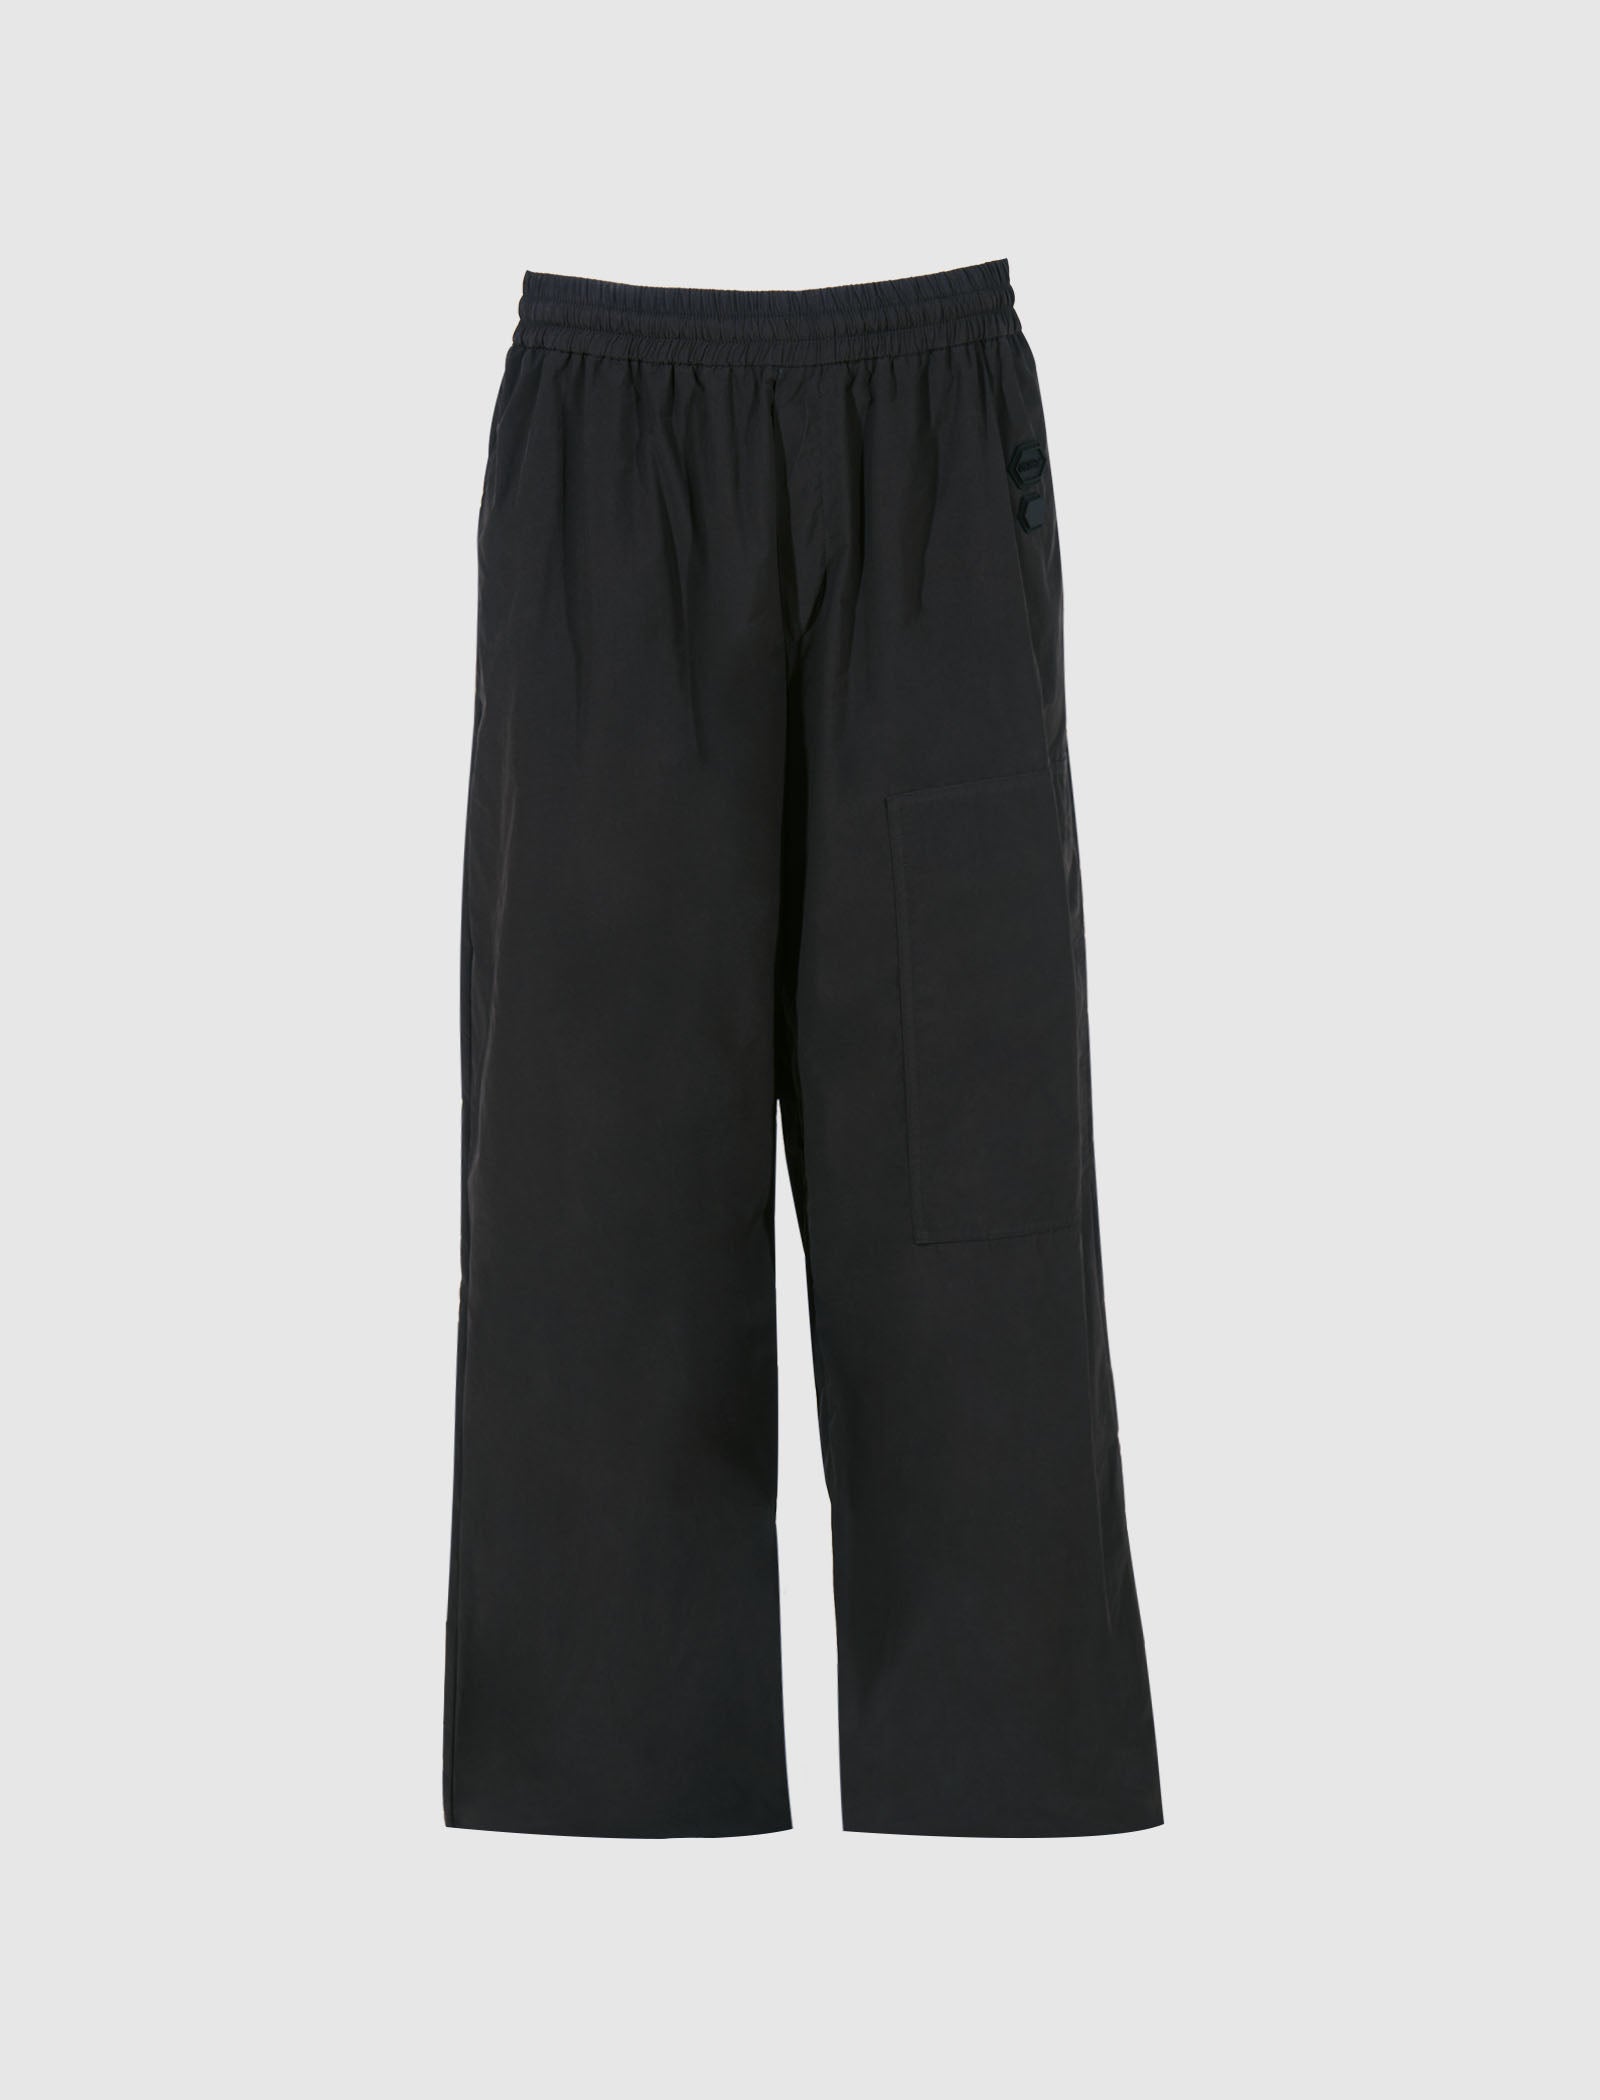 UTILITY WIDE PANT